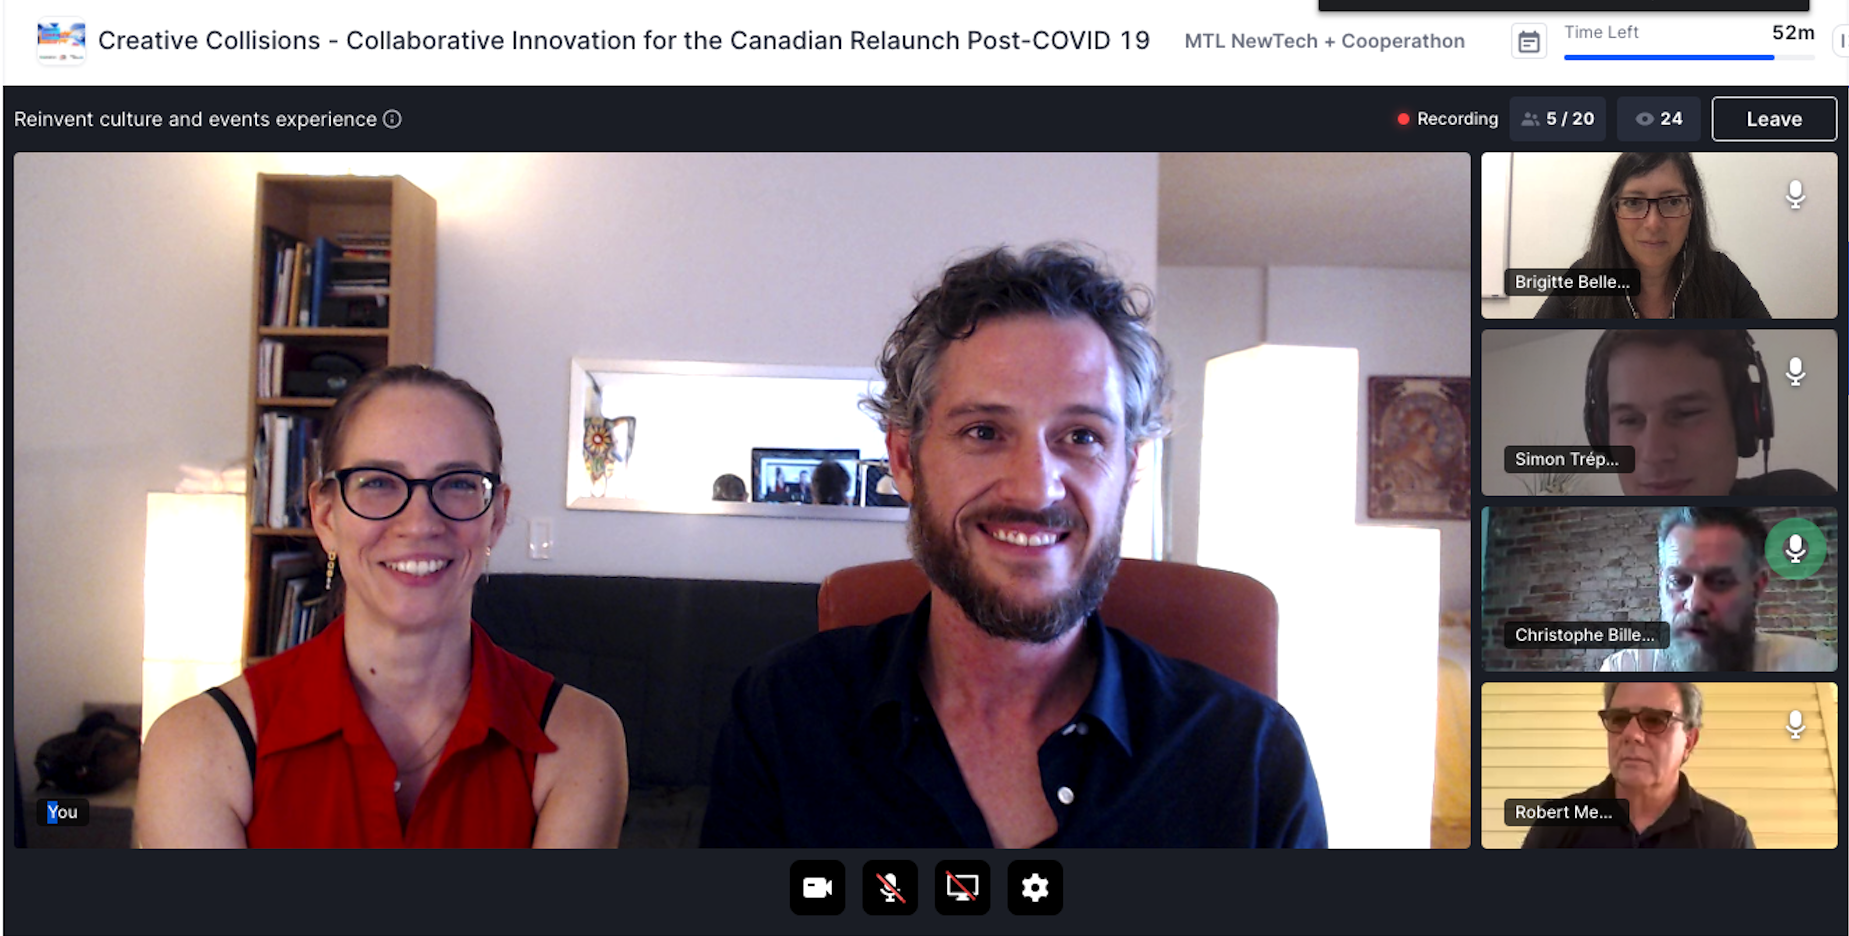 Creative Collisions - Collaborative Innovation for the Canadian Relaunch Post-COVID 19